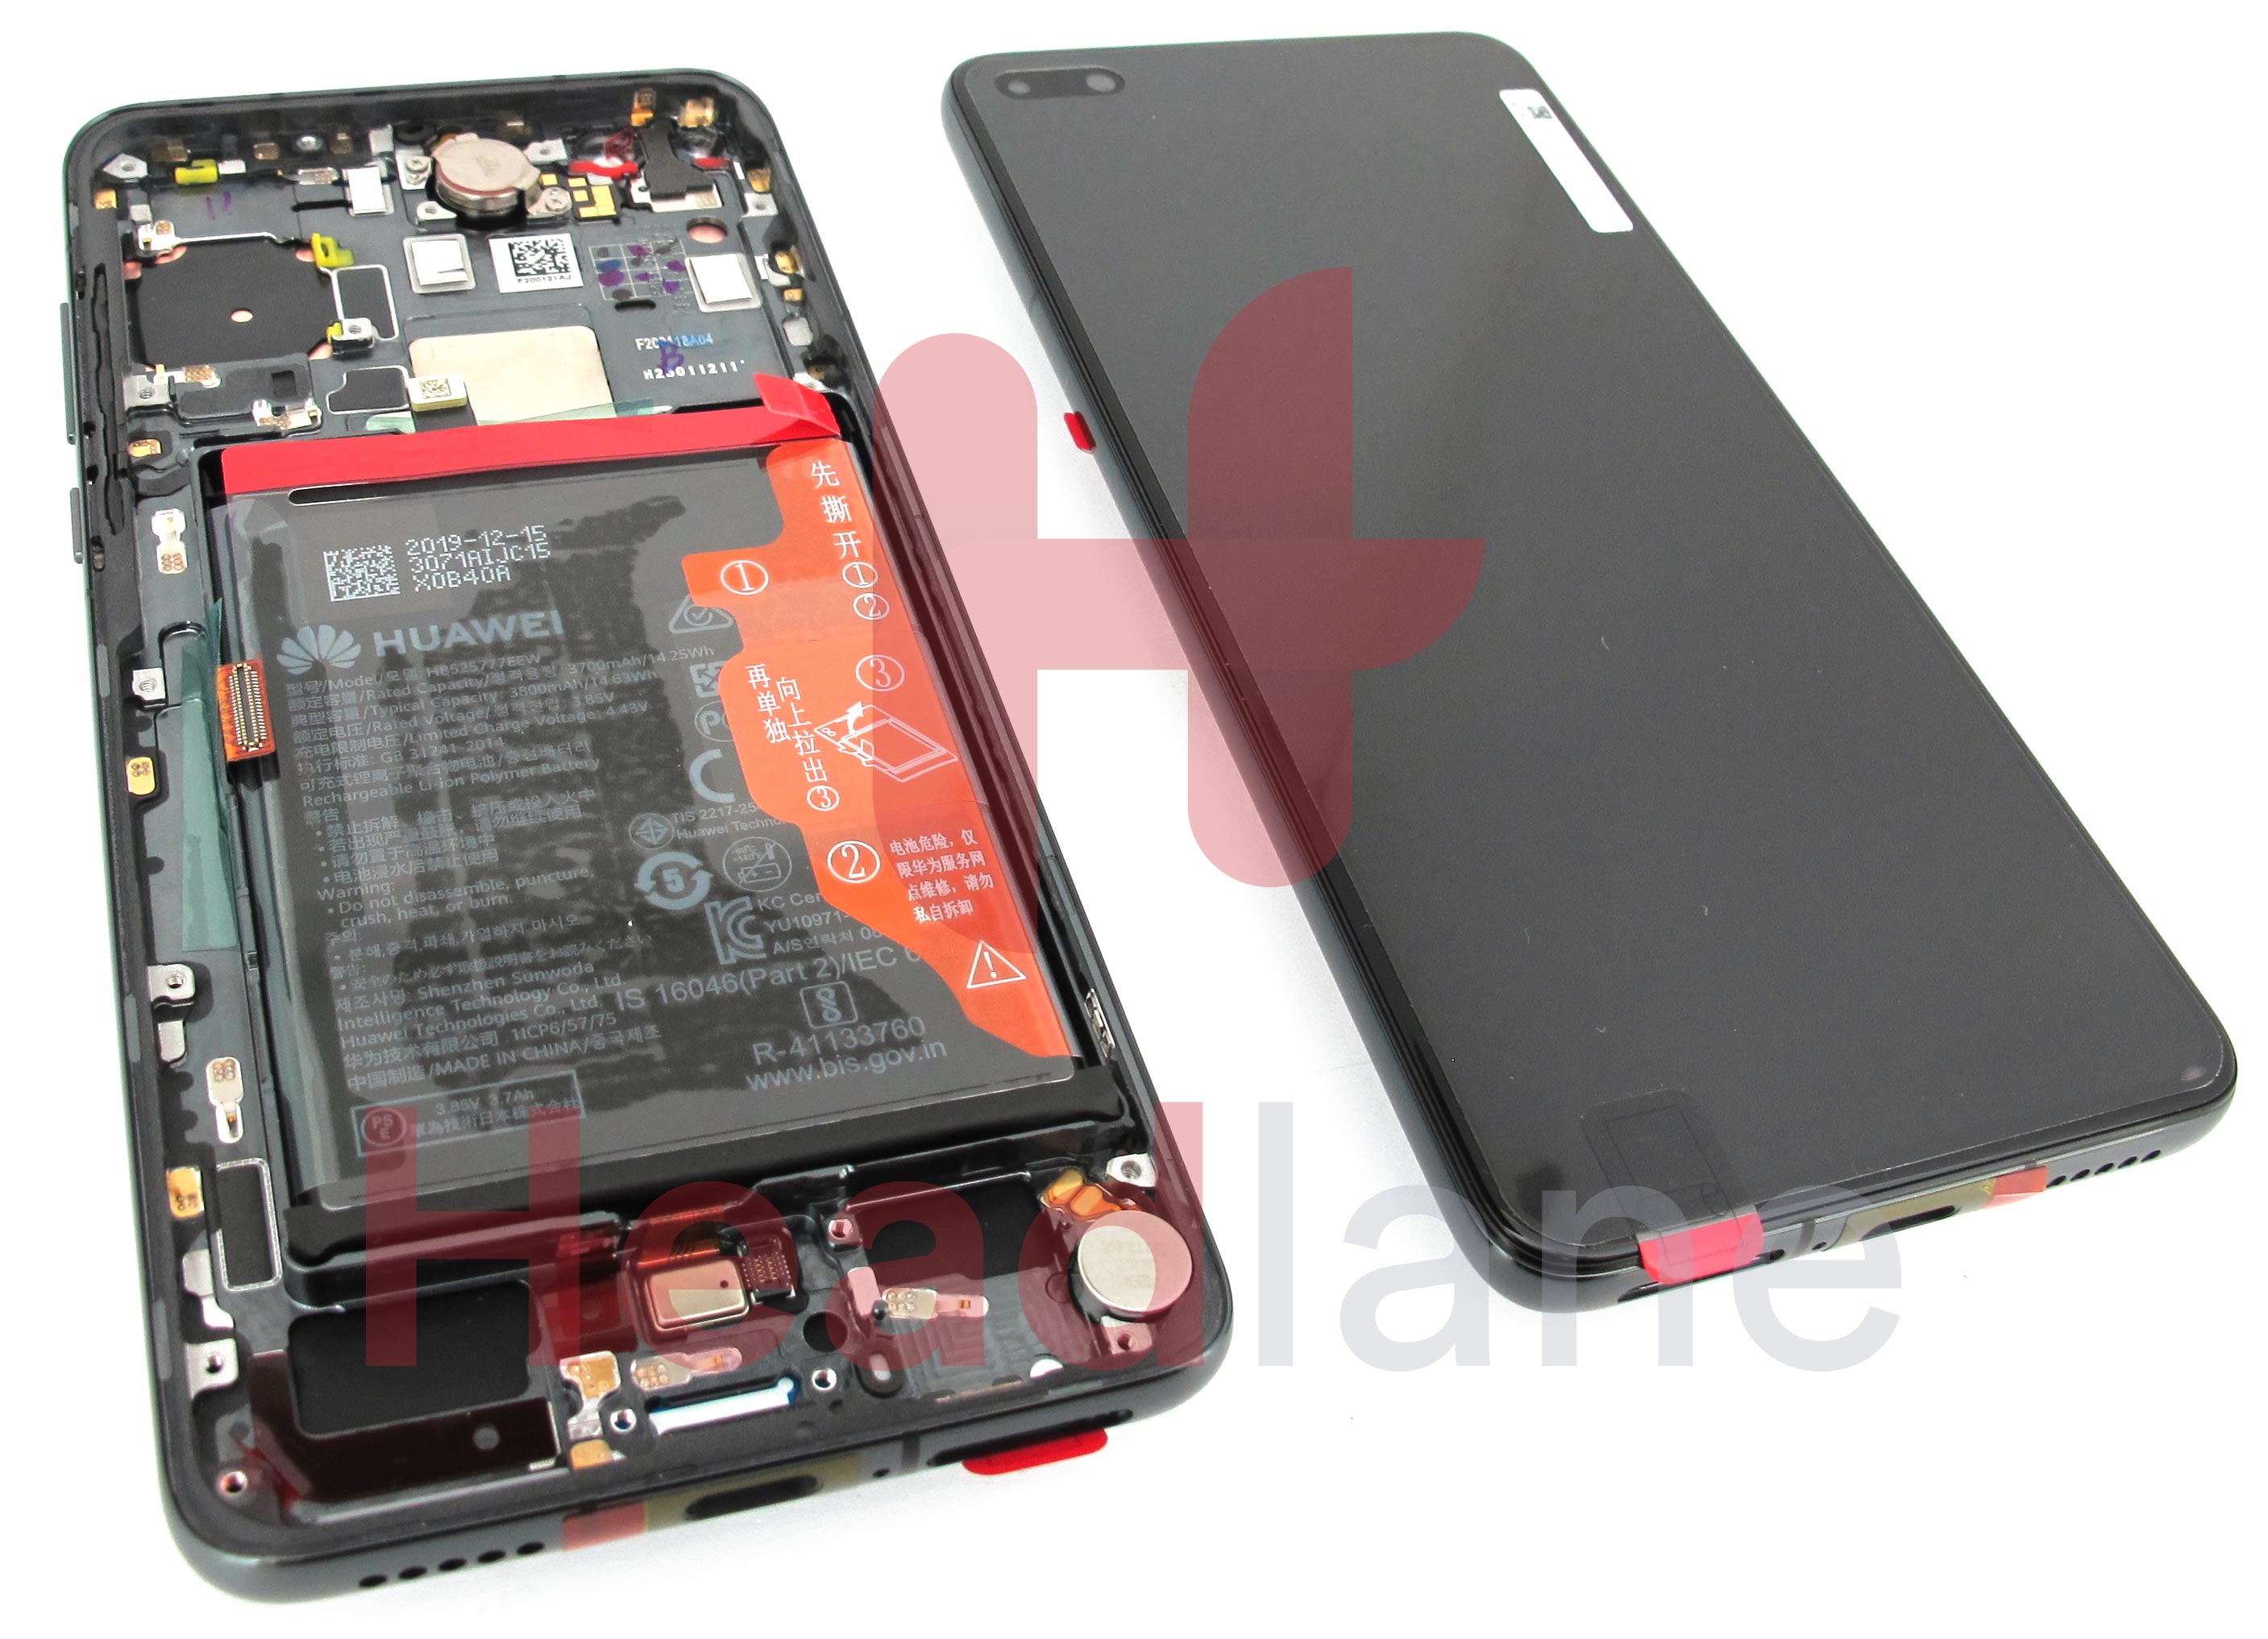 Huawei P40 LCD Display / Screen + Touch + Battery Assembly - Black